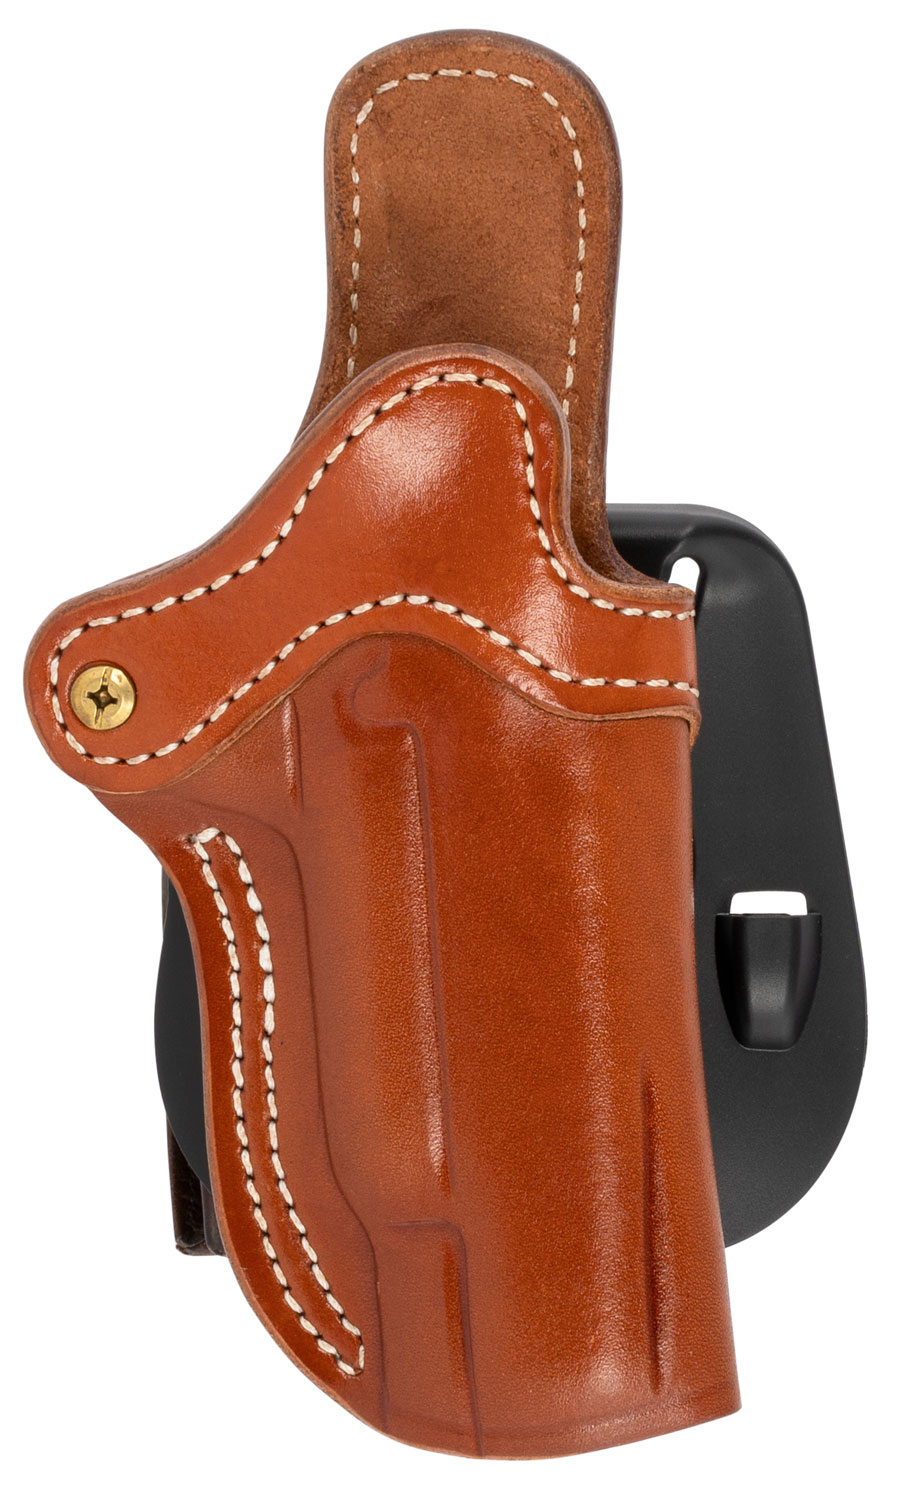 1791 Gunleather ORPDH1CBRR BH1 Optic Ready Size 01 OWB Style made of Leather with Classic Brown Finish, Adjustable Cant & Paddle Mount Type fits 4-5